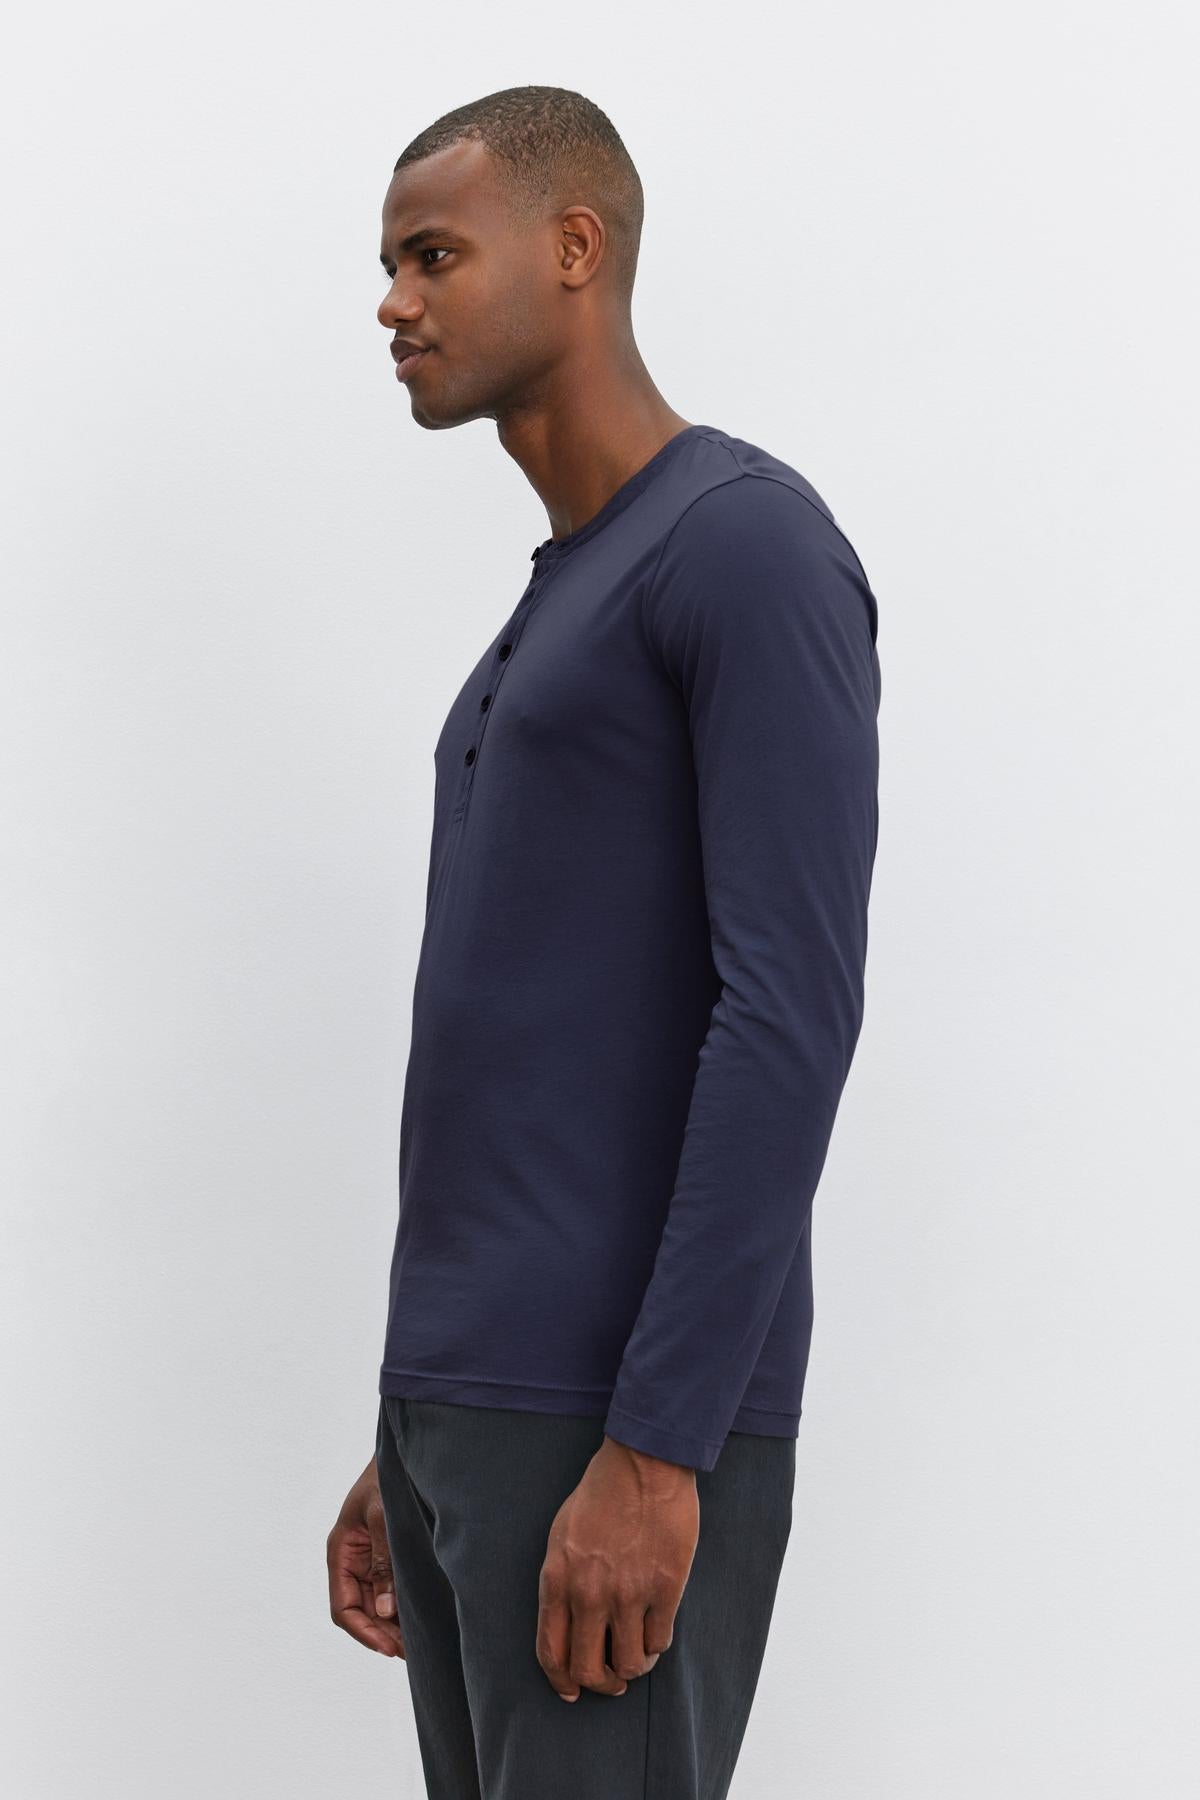 A man is standing in a side view pose, wearing the Velvet by Graham & Spencer ALVARO HENLEY and dark pants against a plain white background.-36273890558145